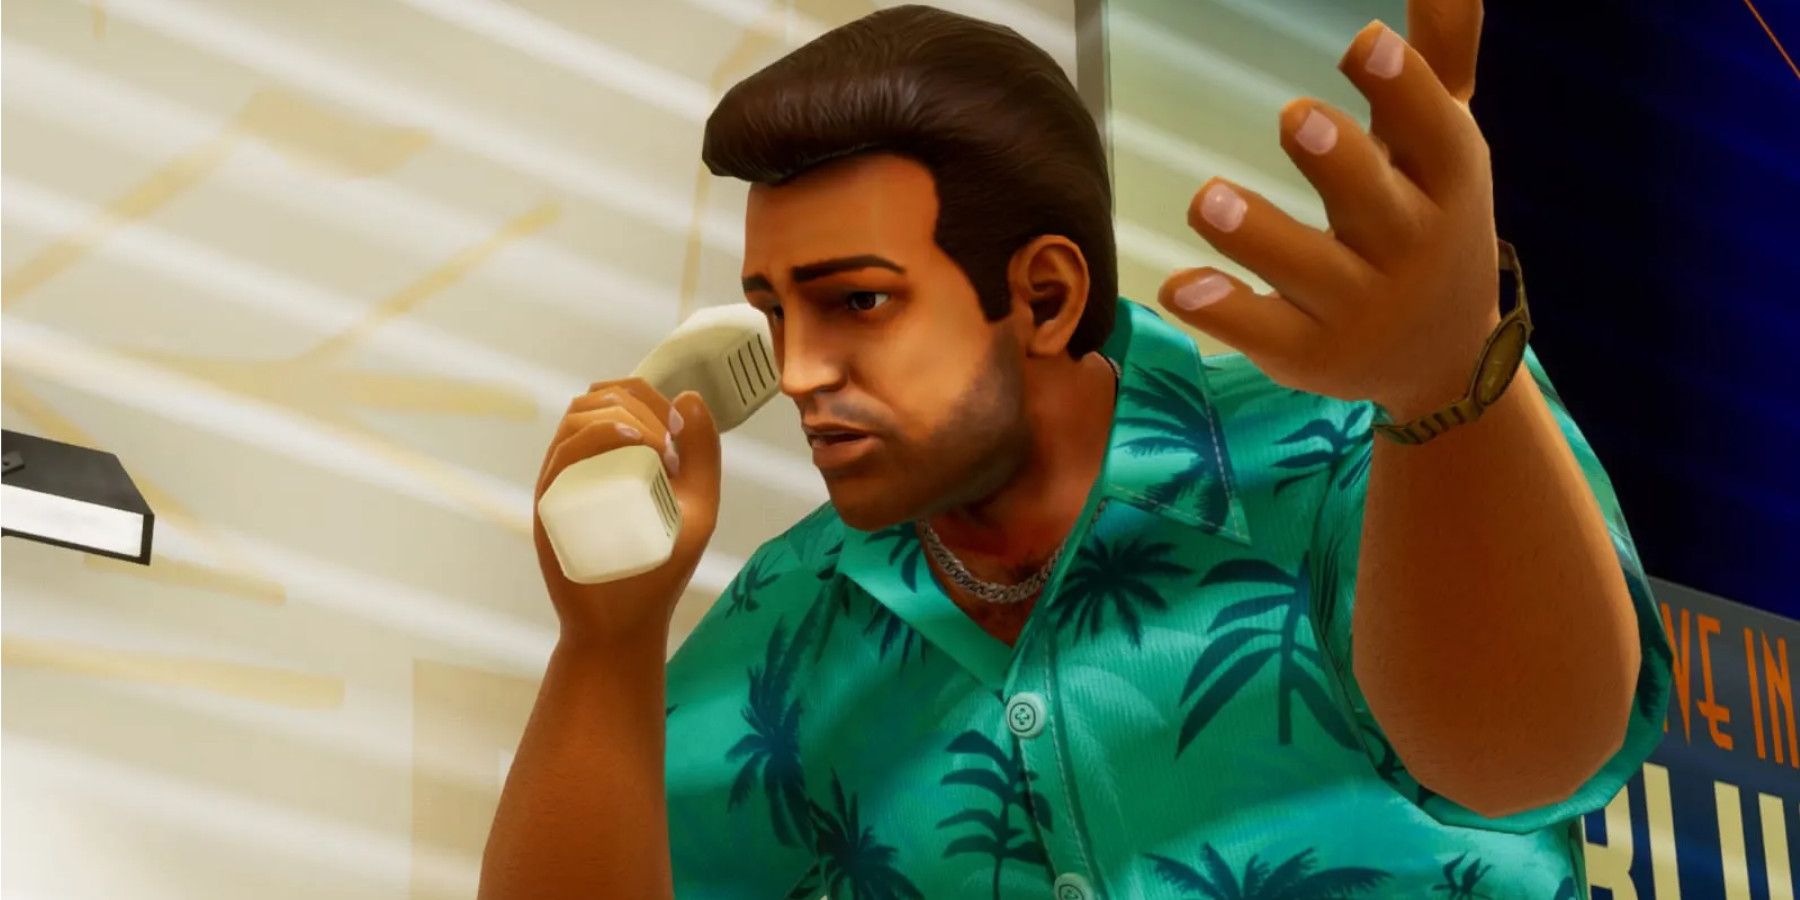 gta-vice-city-tommy-vercetti-remastered-on-the-phone